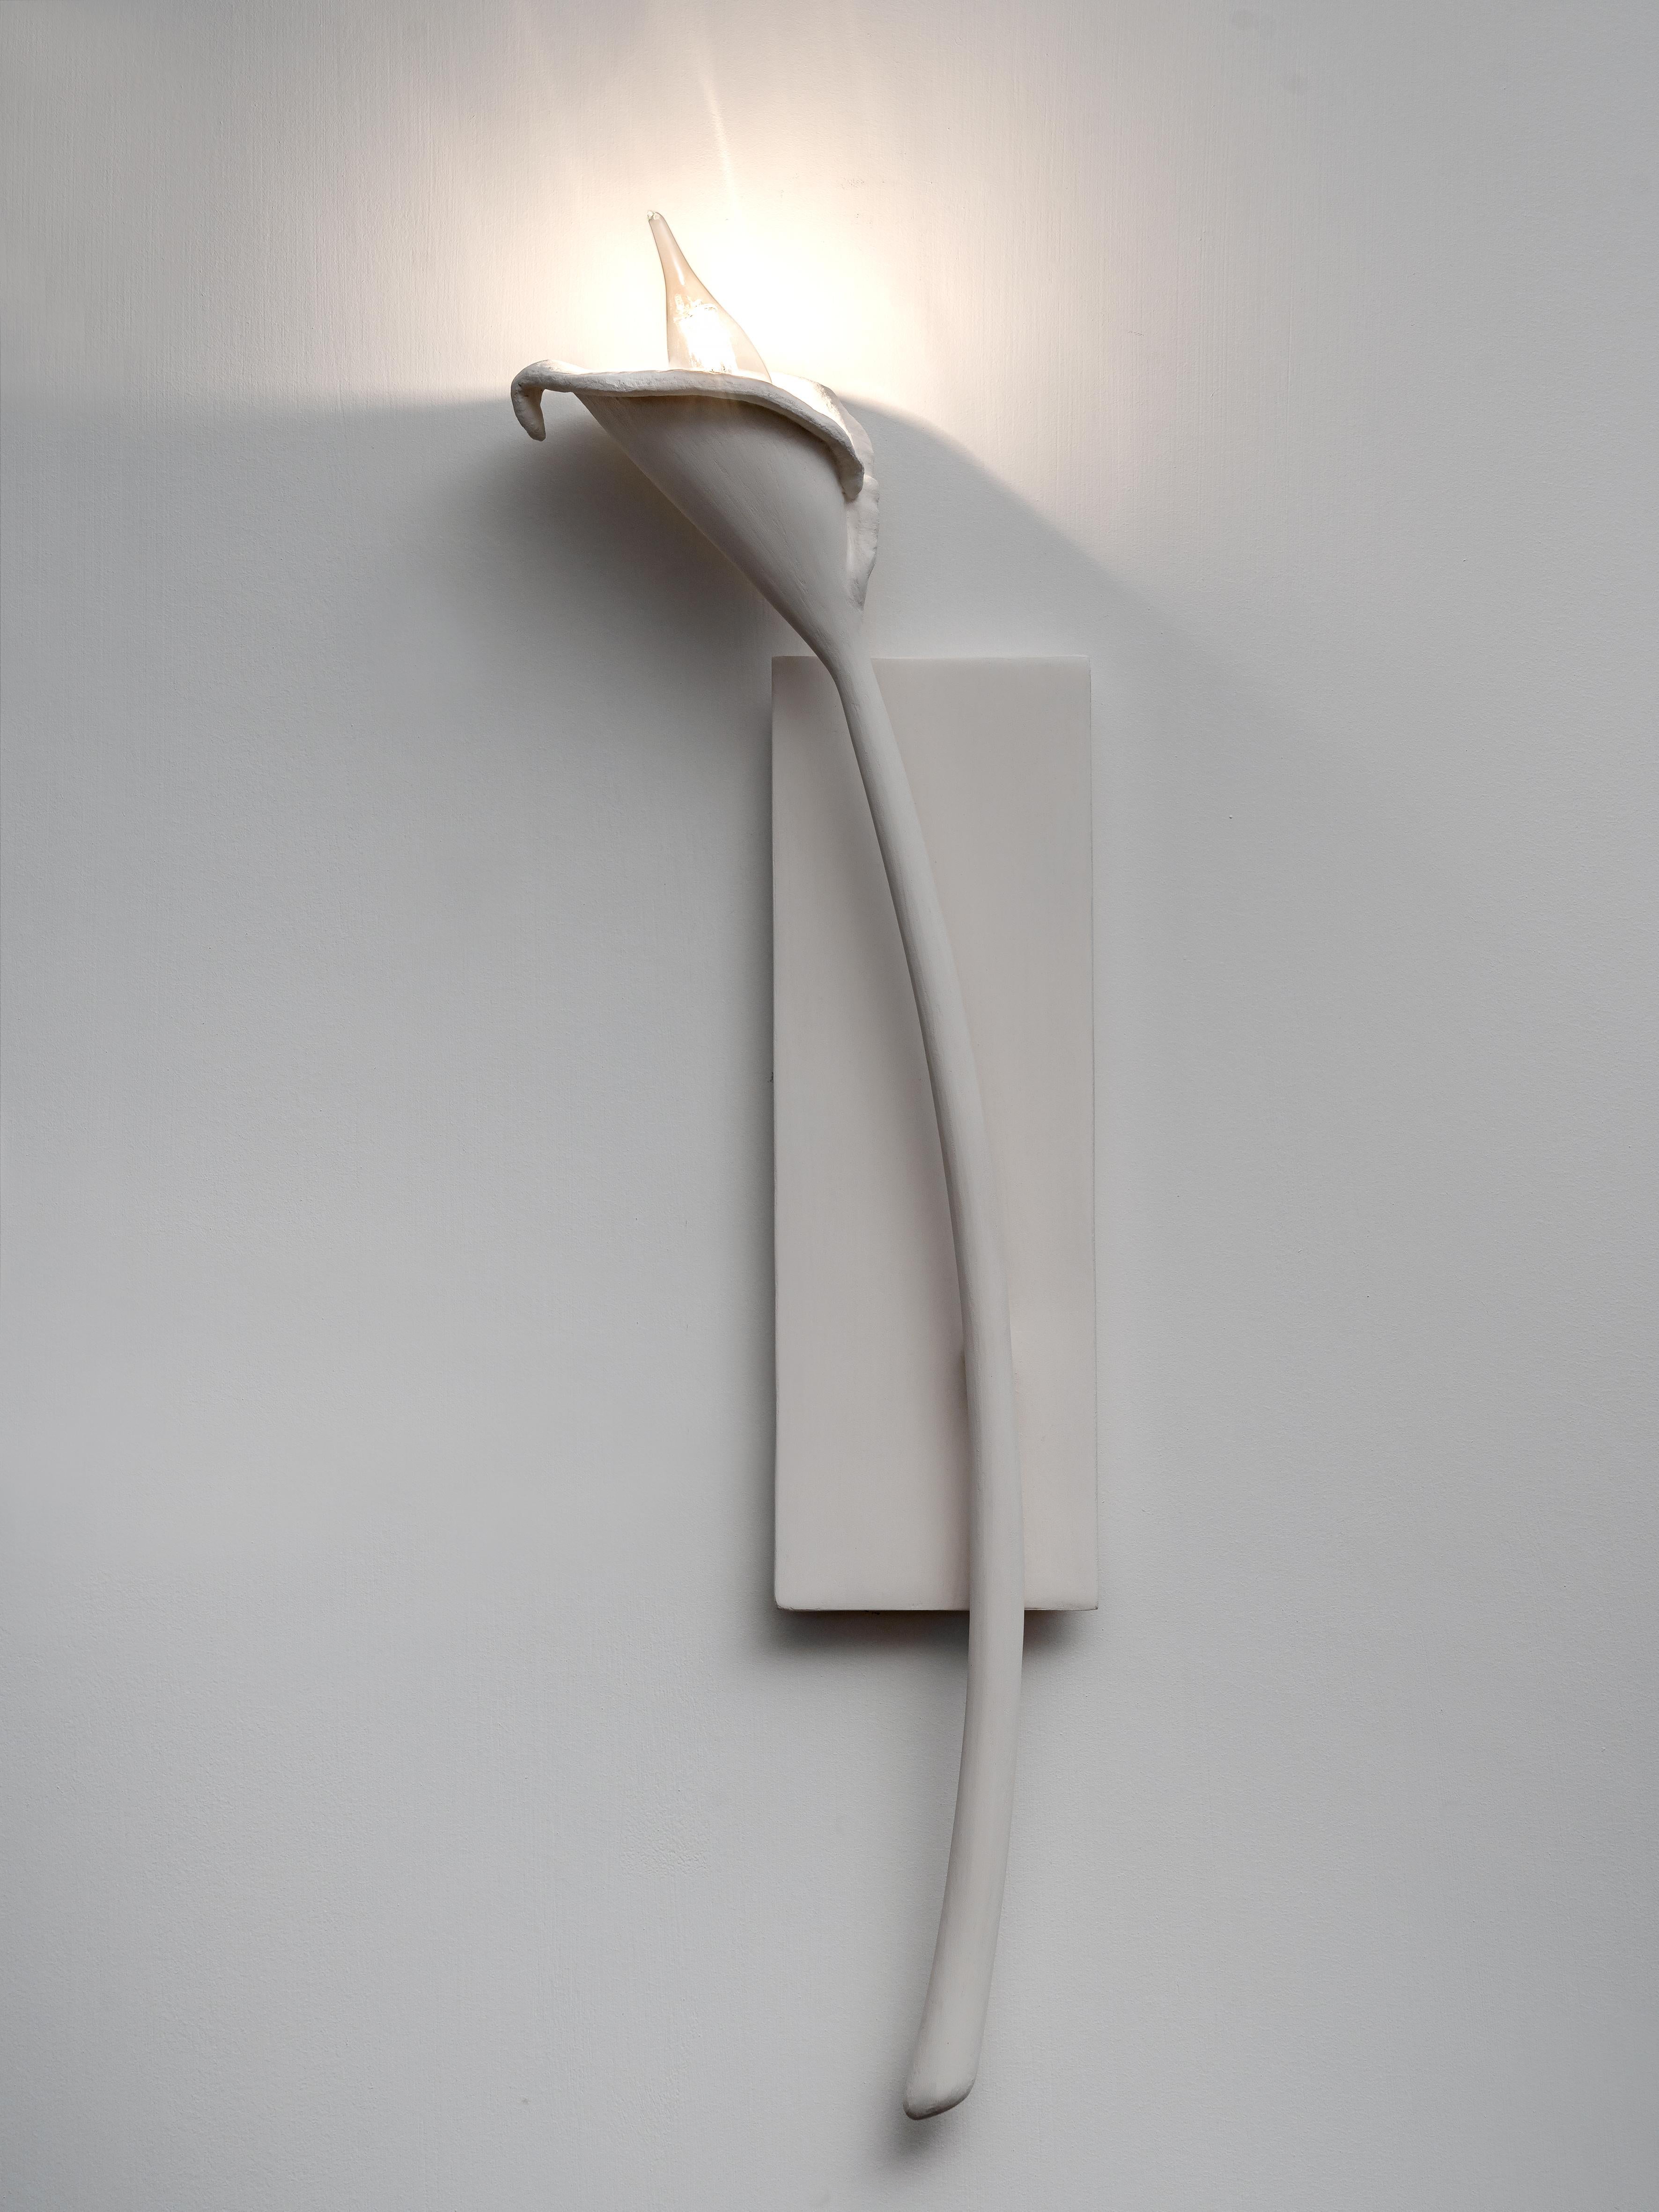 Hand-sculpted in plaster you can select from a single element or a pair of Calla Lily Wall Light. Available in white and black plaster finish, in left and right version.  
Each piece is hand of a cut, individually hammered, hand formed, then